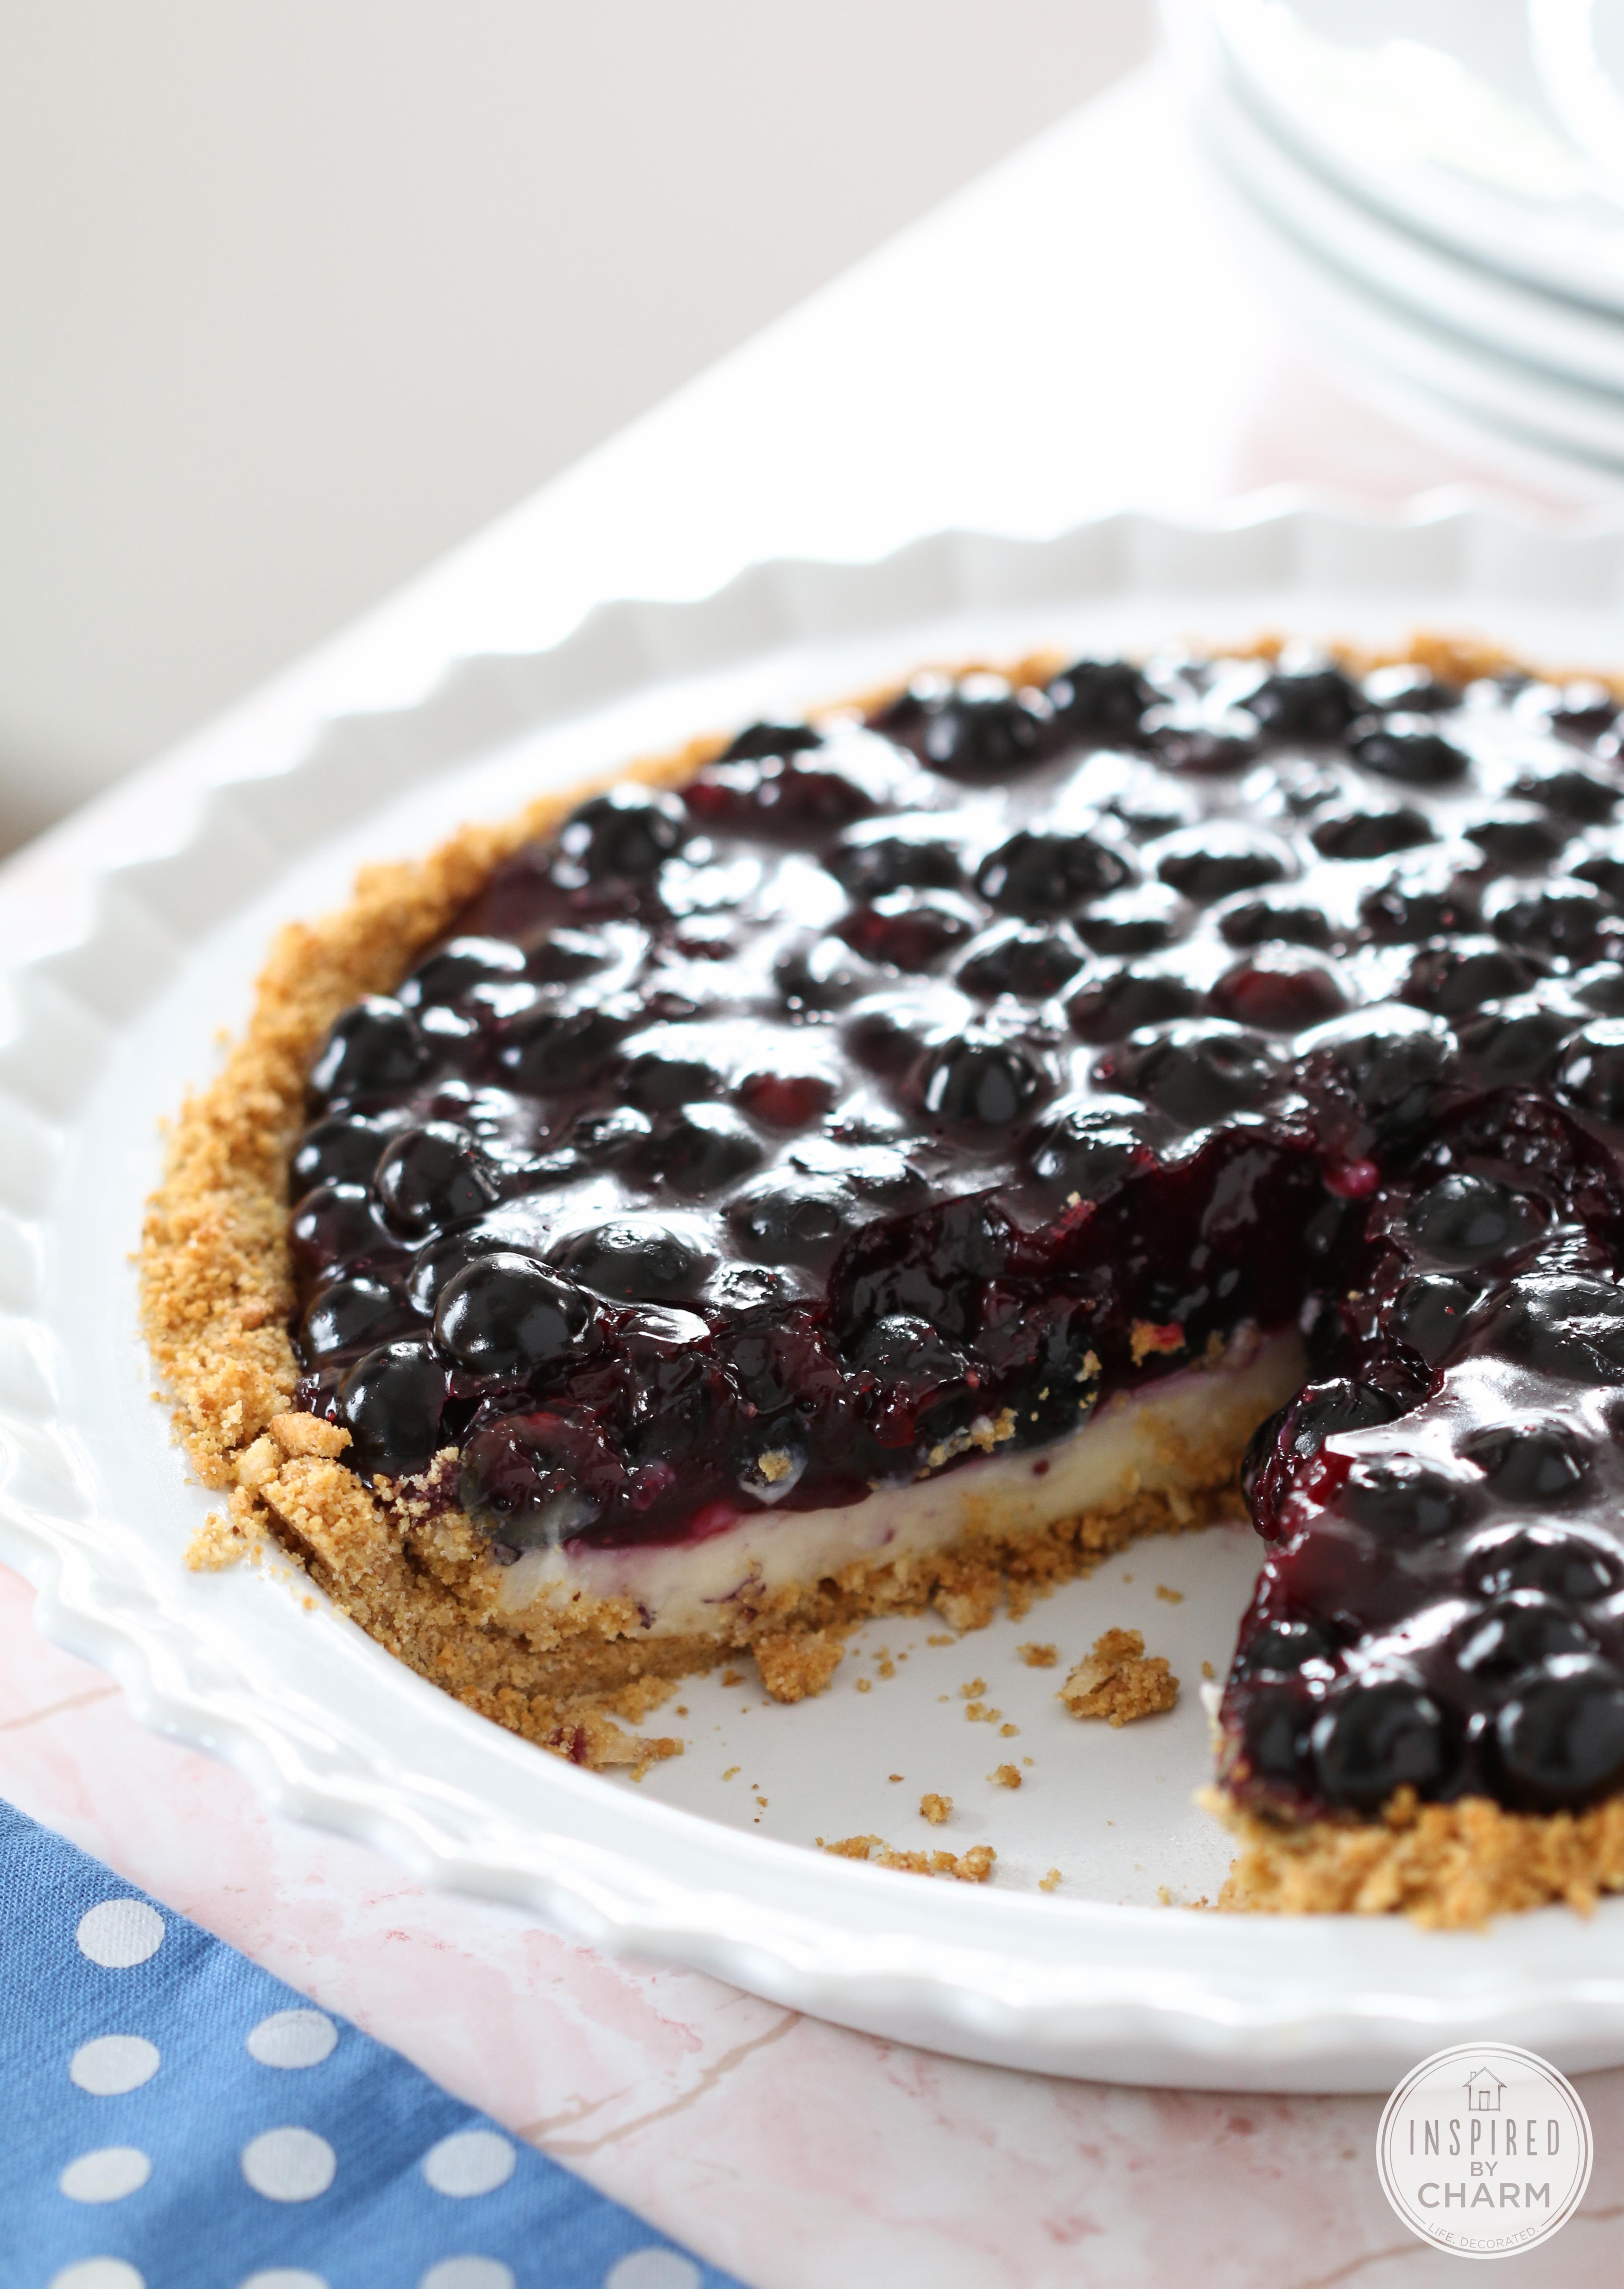 This Blueberry Cream Pie make a delicious summer dessert. #summer #dessert #recipe #blueberry #cream #pie #4thofJuly